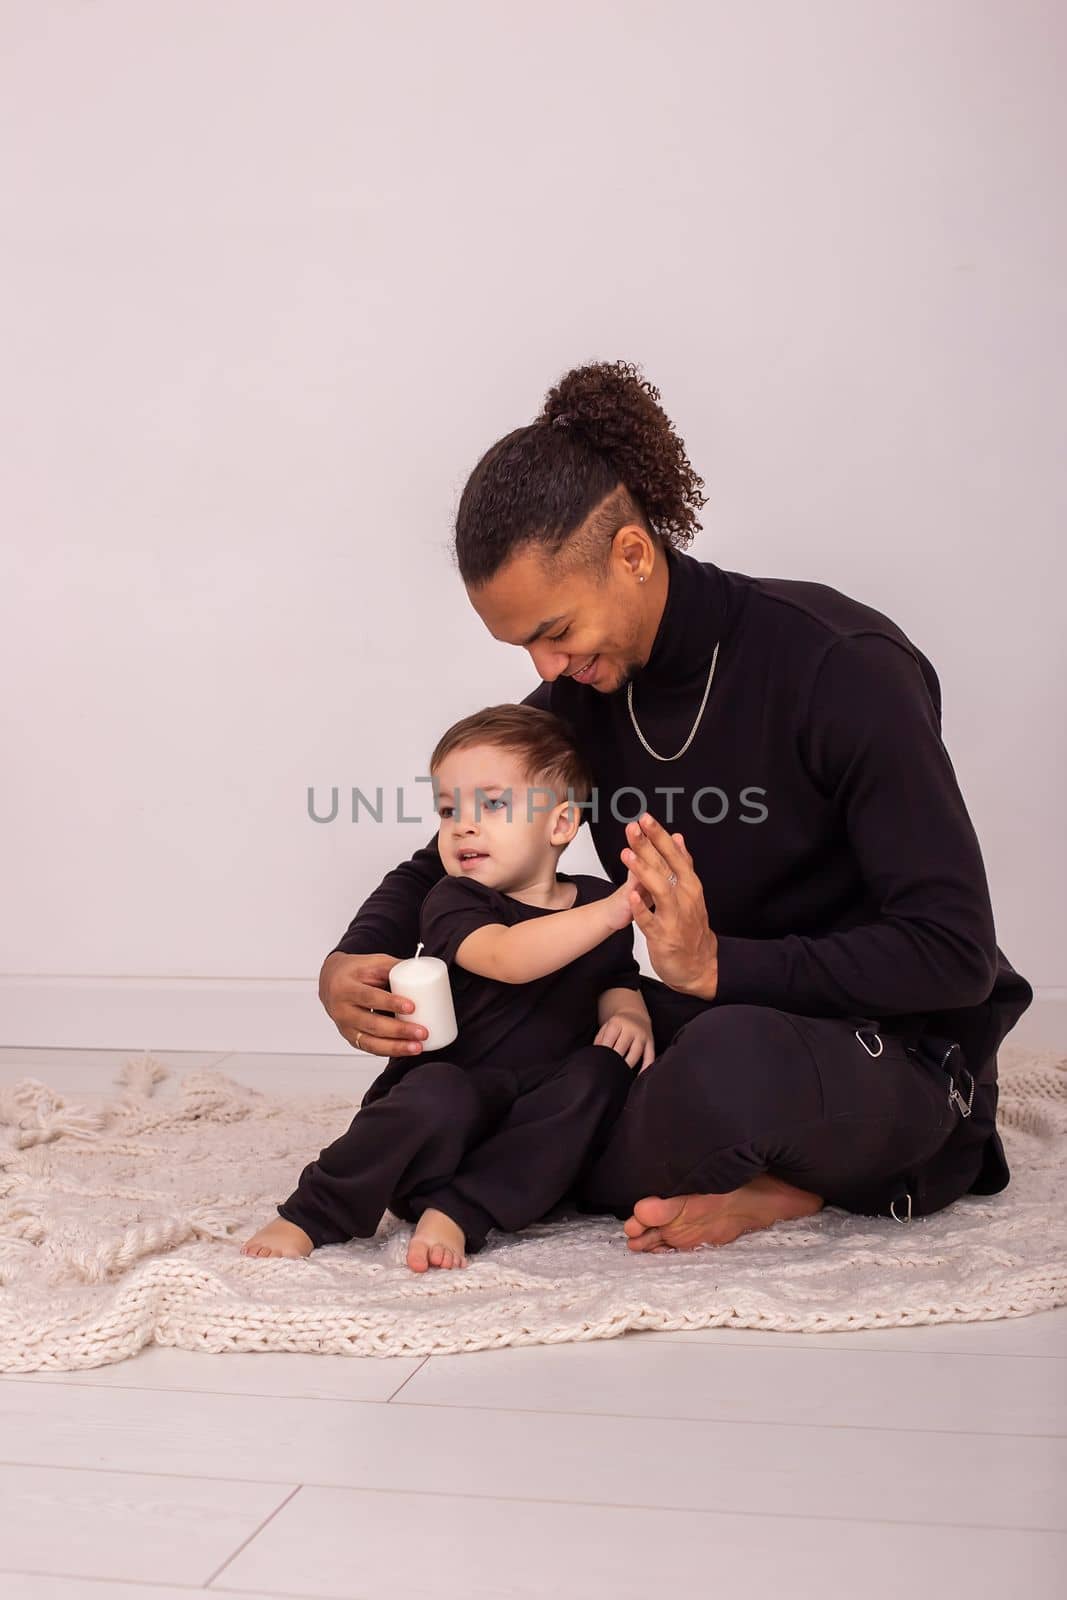 Stylish father and son, in black clothes, sitting on a knitted blanket, on the floor in the room, having fun playing. The father lifts his son above himself. Copy space. Vertical